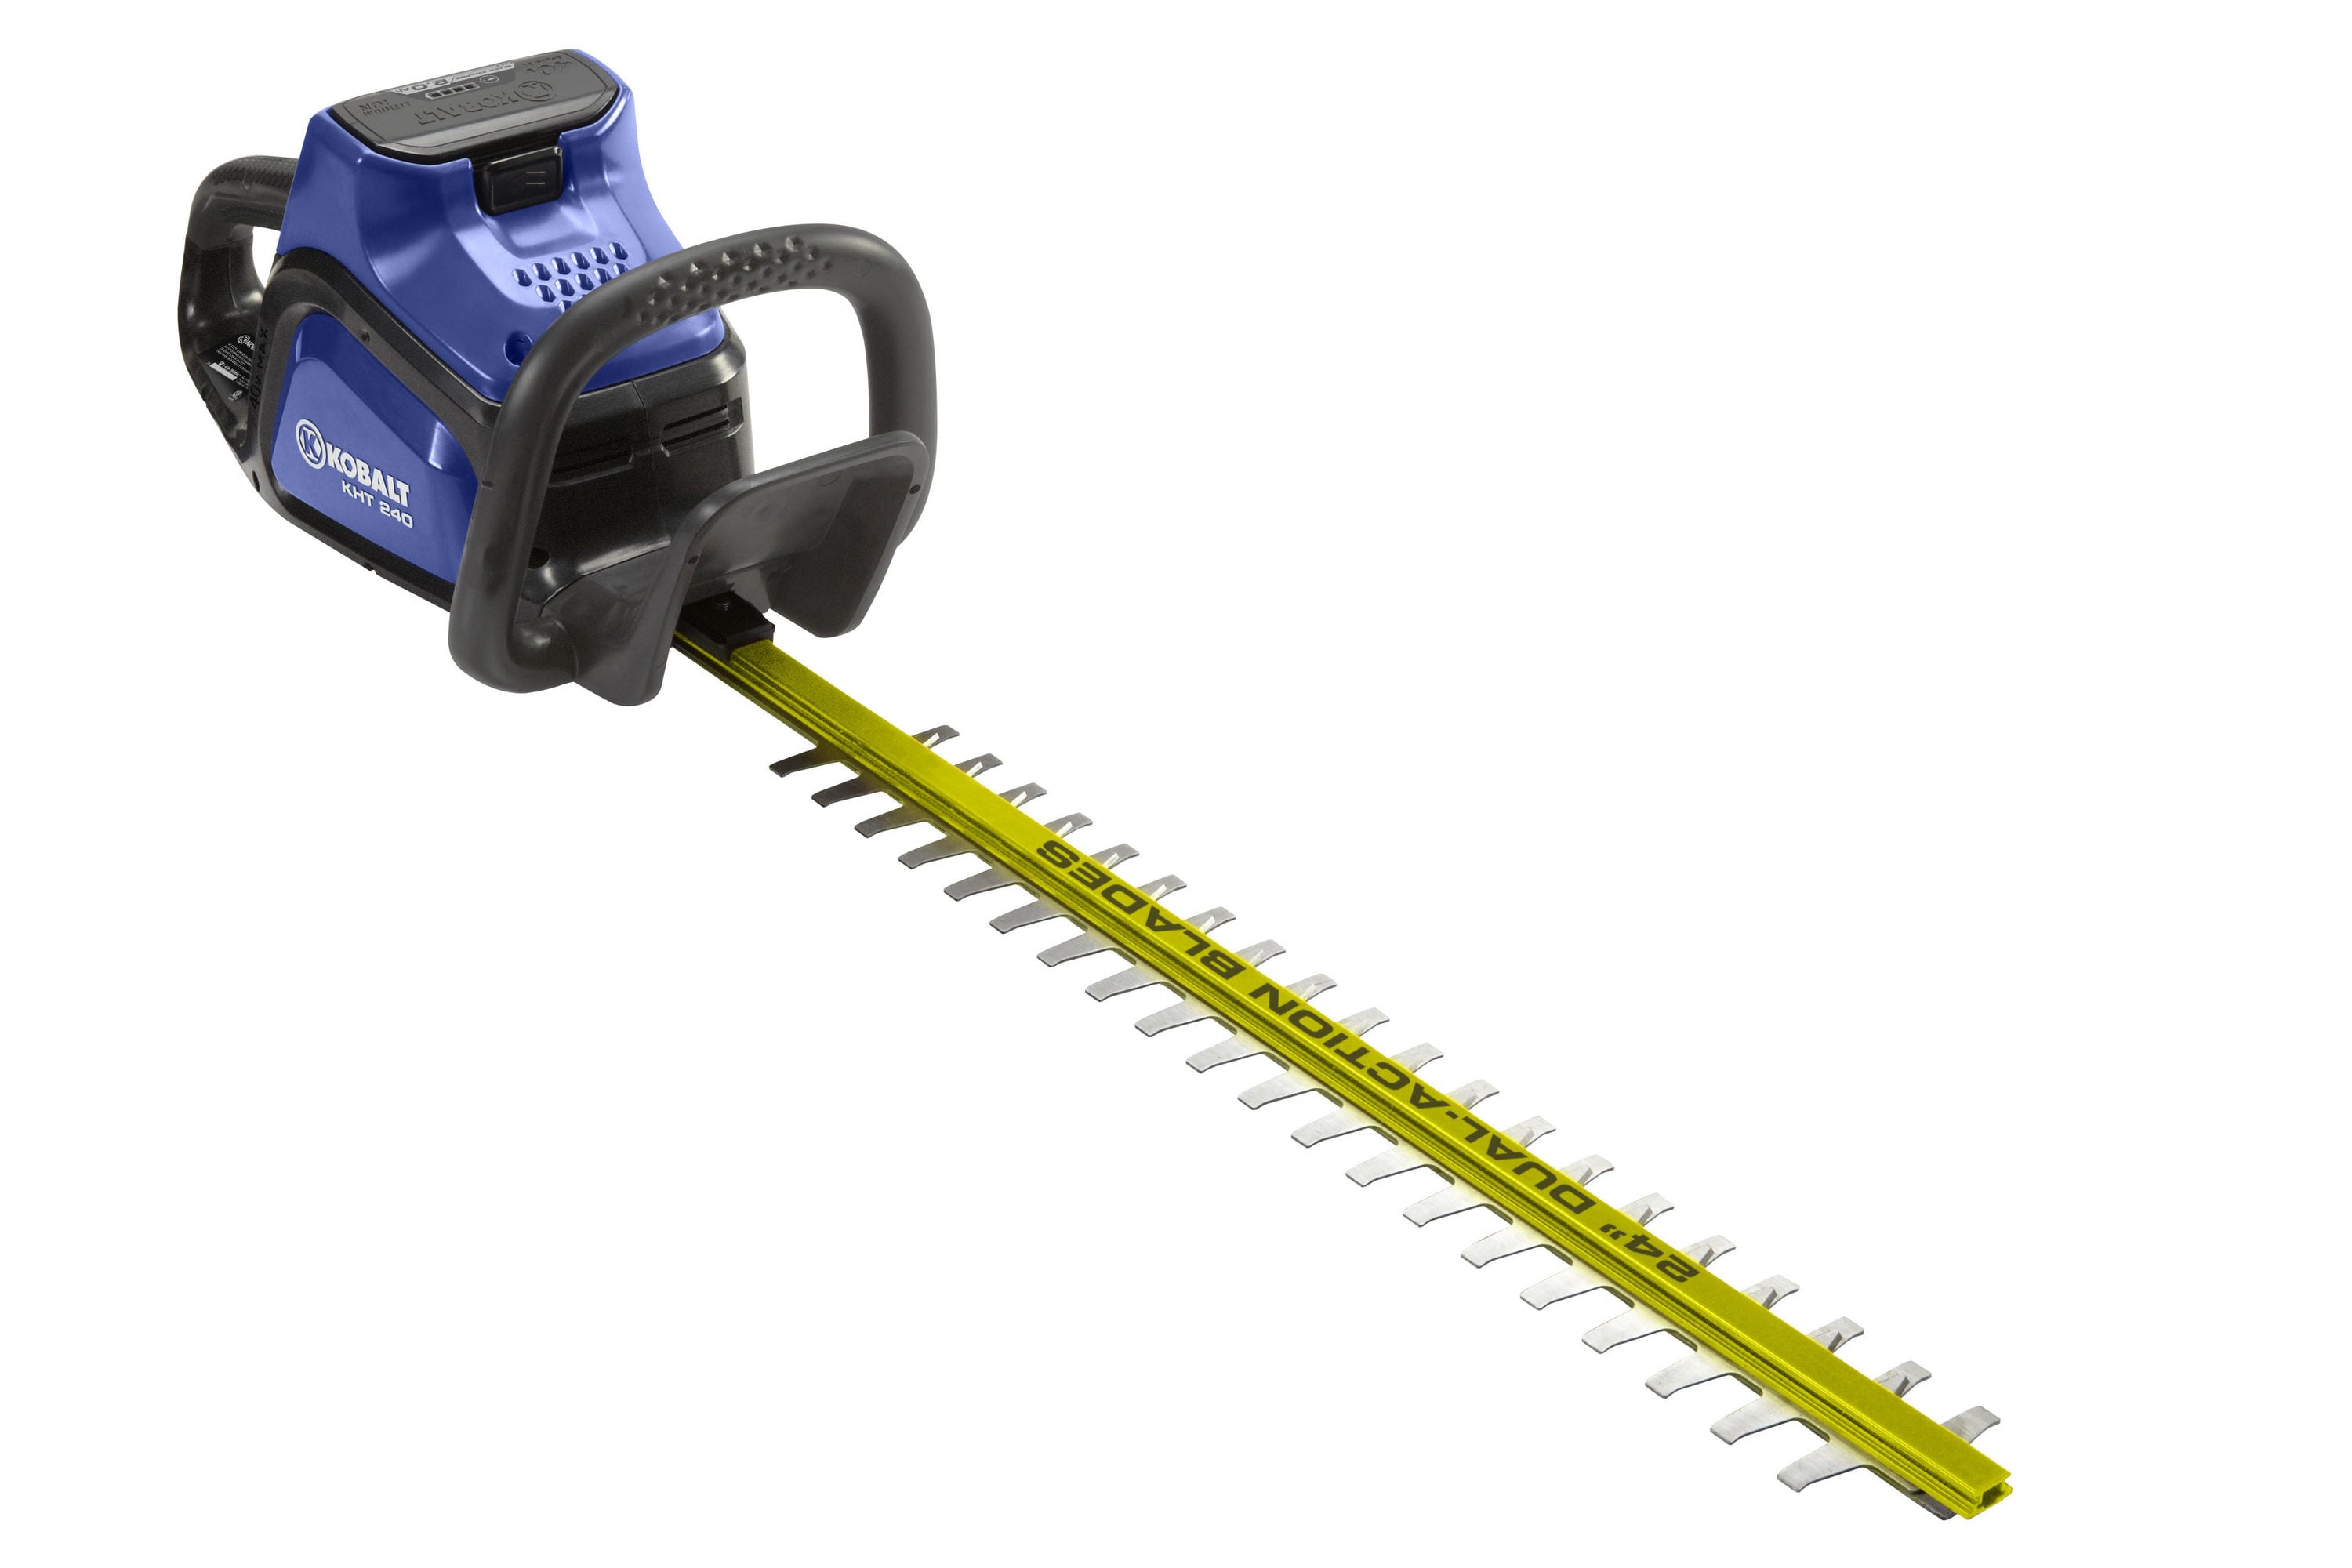 40V Max Lithium-Ion Hedge Trimmer - PowerSmith